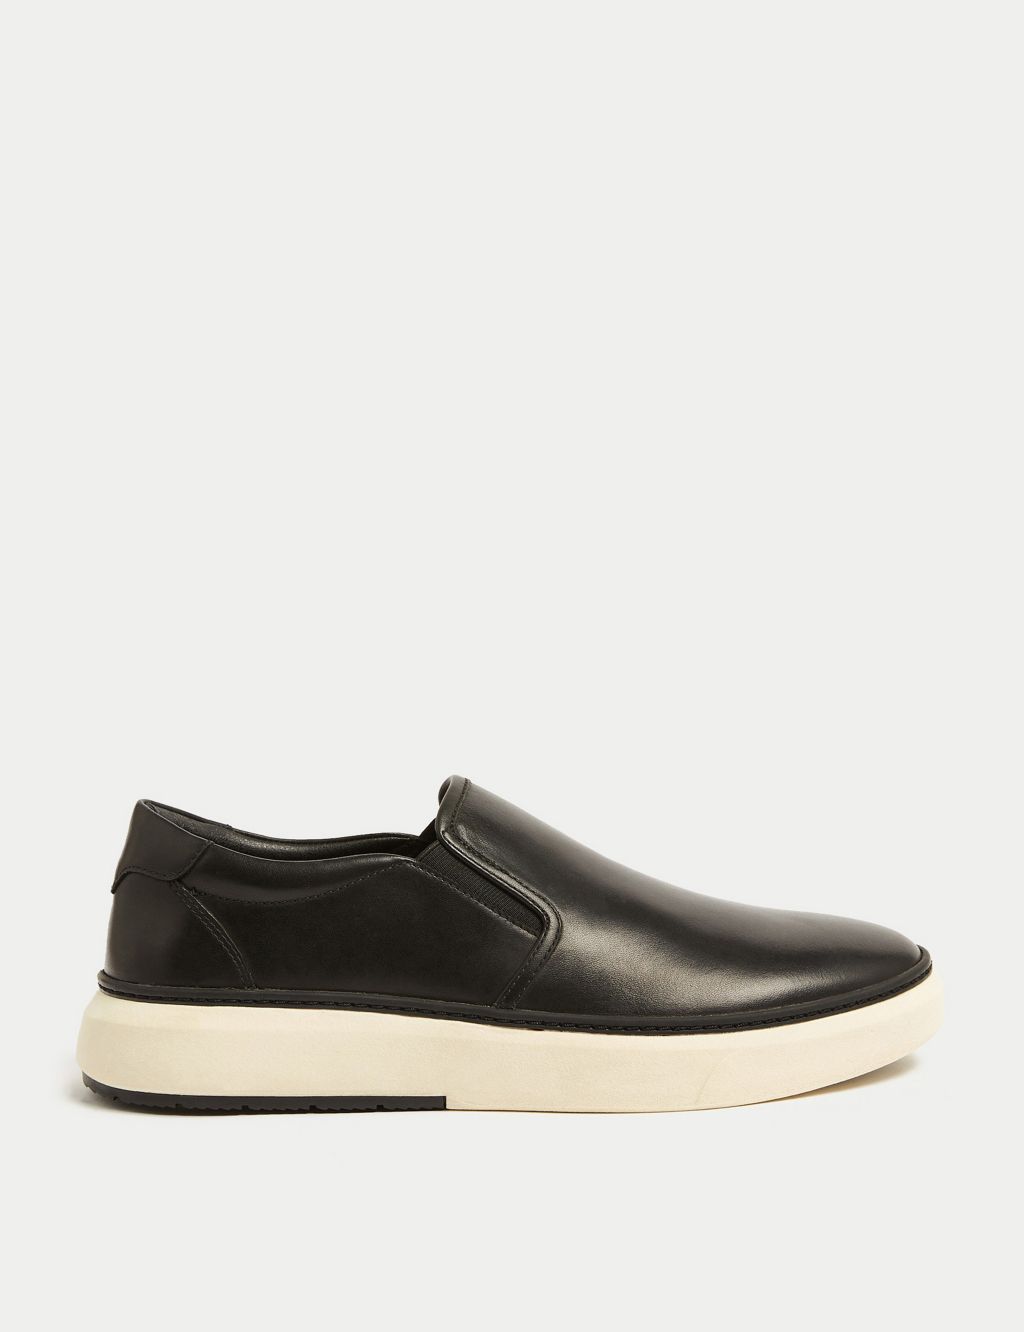 Airflex™ Leather Slip-On Trainers image 1